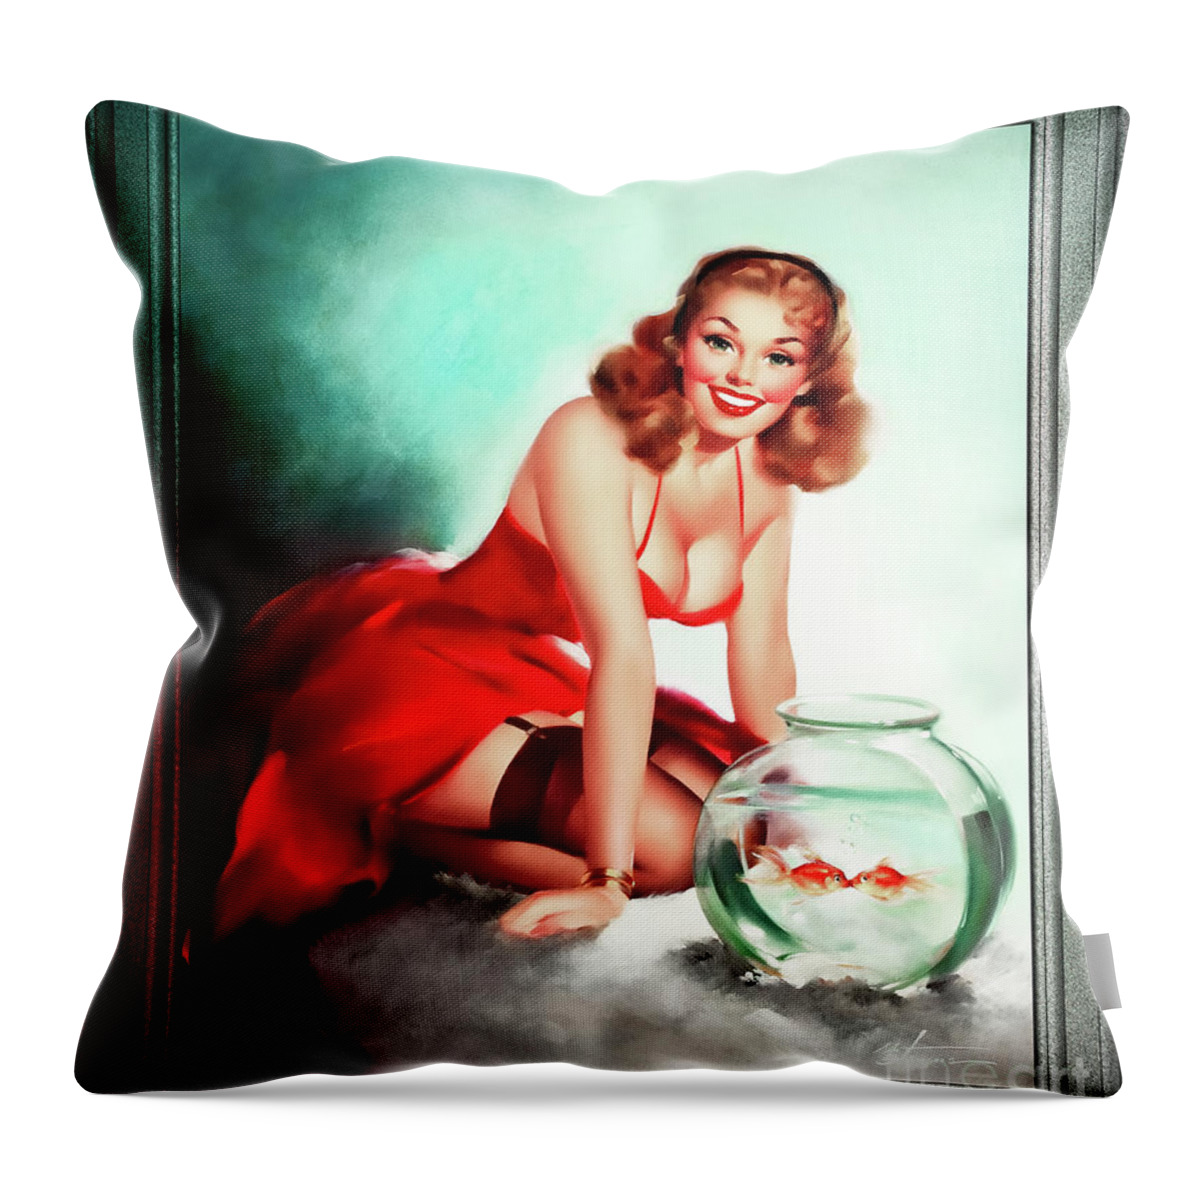 Kissing Fish Throw Pillow featuring the painting Kissing Fish by Edward Runci Vintage Pin-Up Girl Art by Rolando Burbon